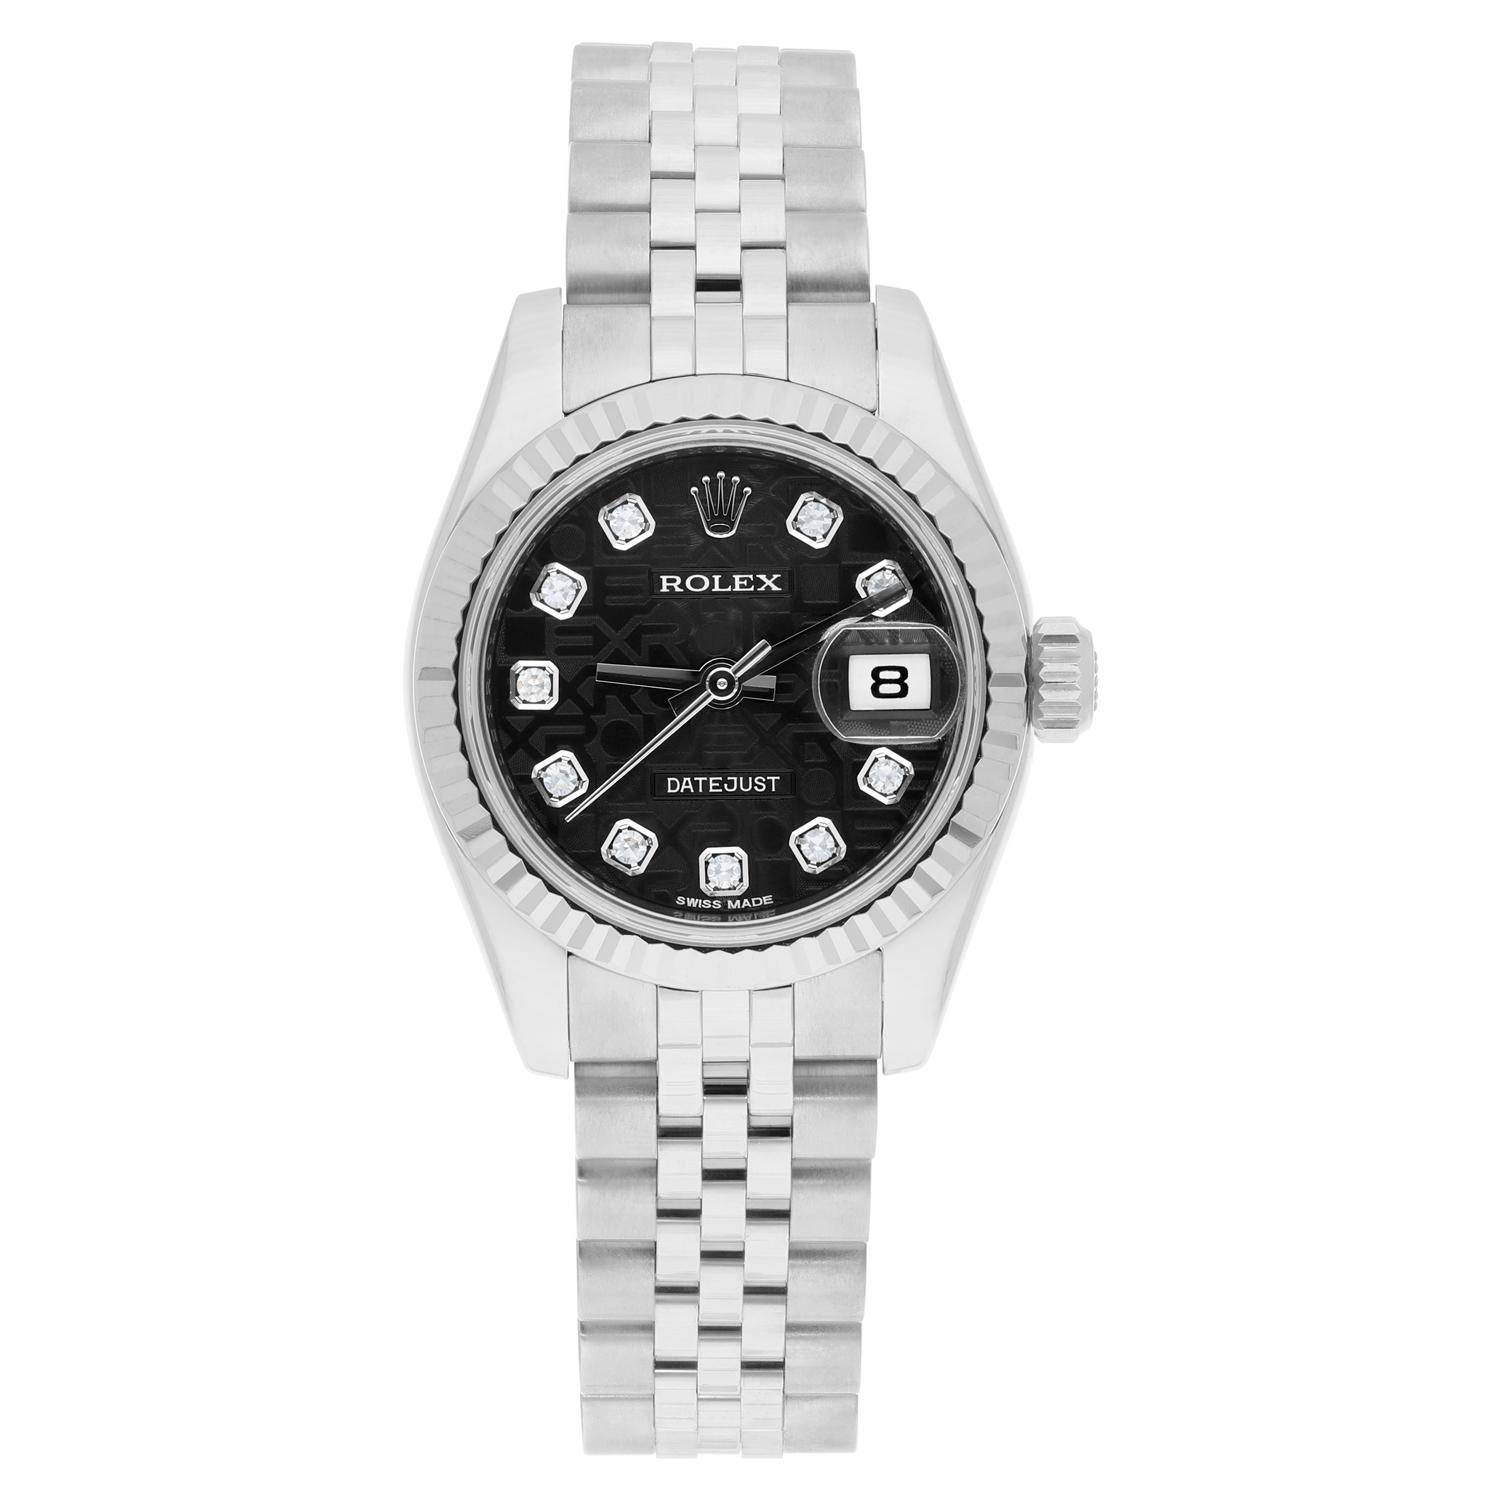 This authentic women's Rolex Lady-Datejust wristwatch is a luxurious timepiece that features a 26mm silver stainless steel case with a fluted fixed bezel. The dial pattern is a Rolex Jubilee with diamond markers. The bracelet has a hidden fold clasp